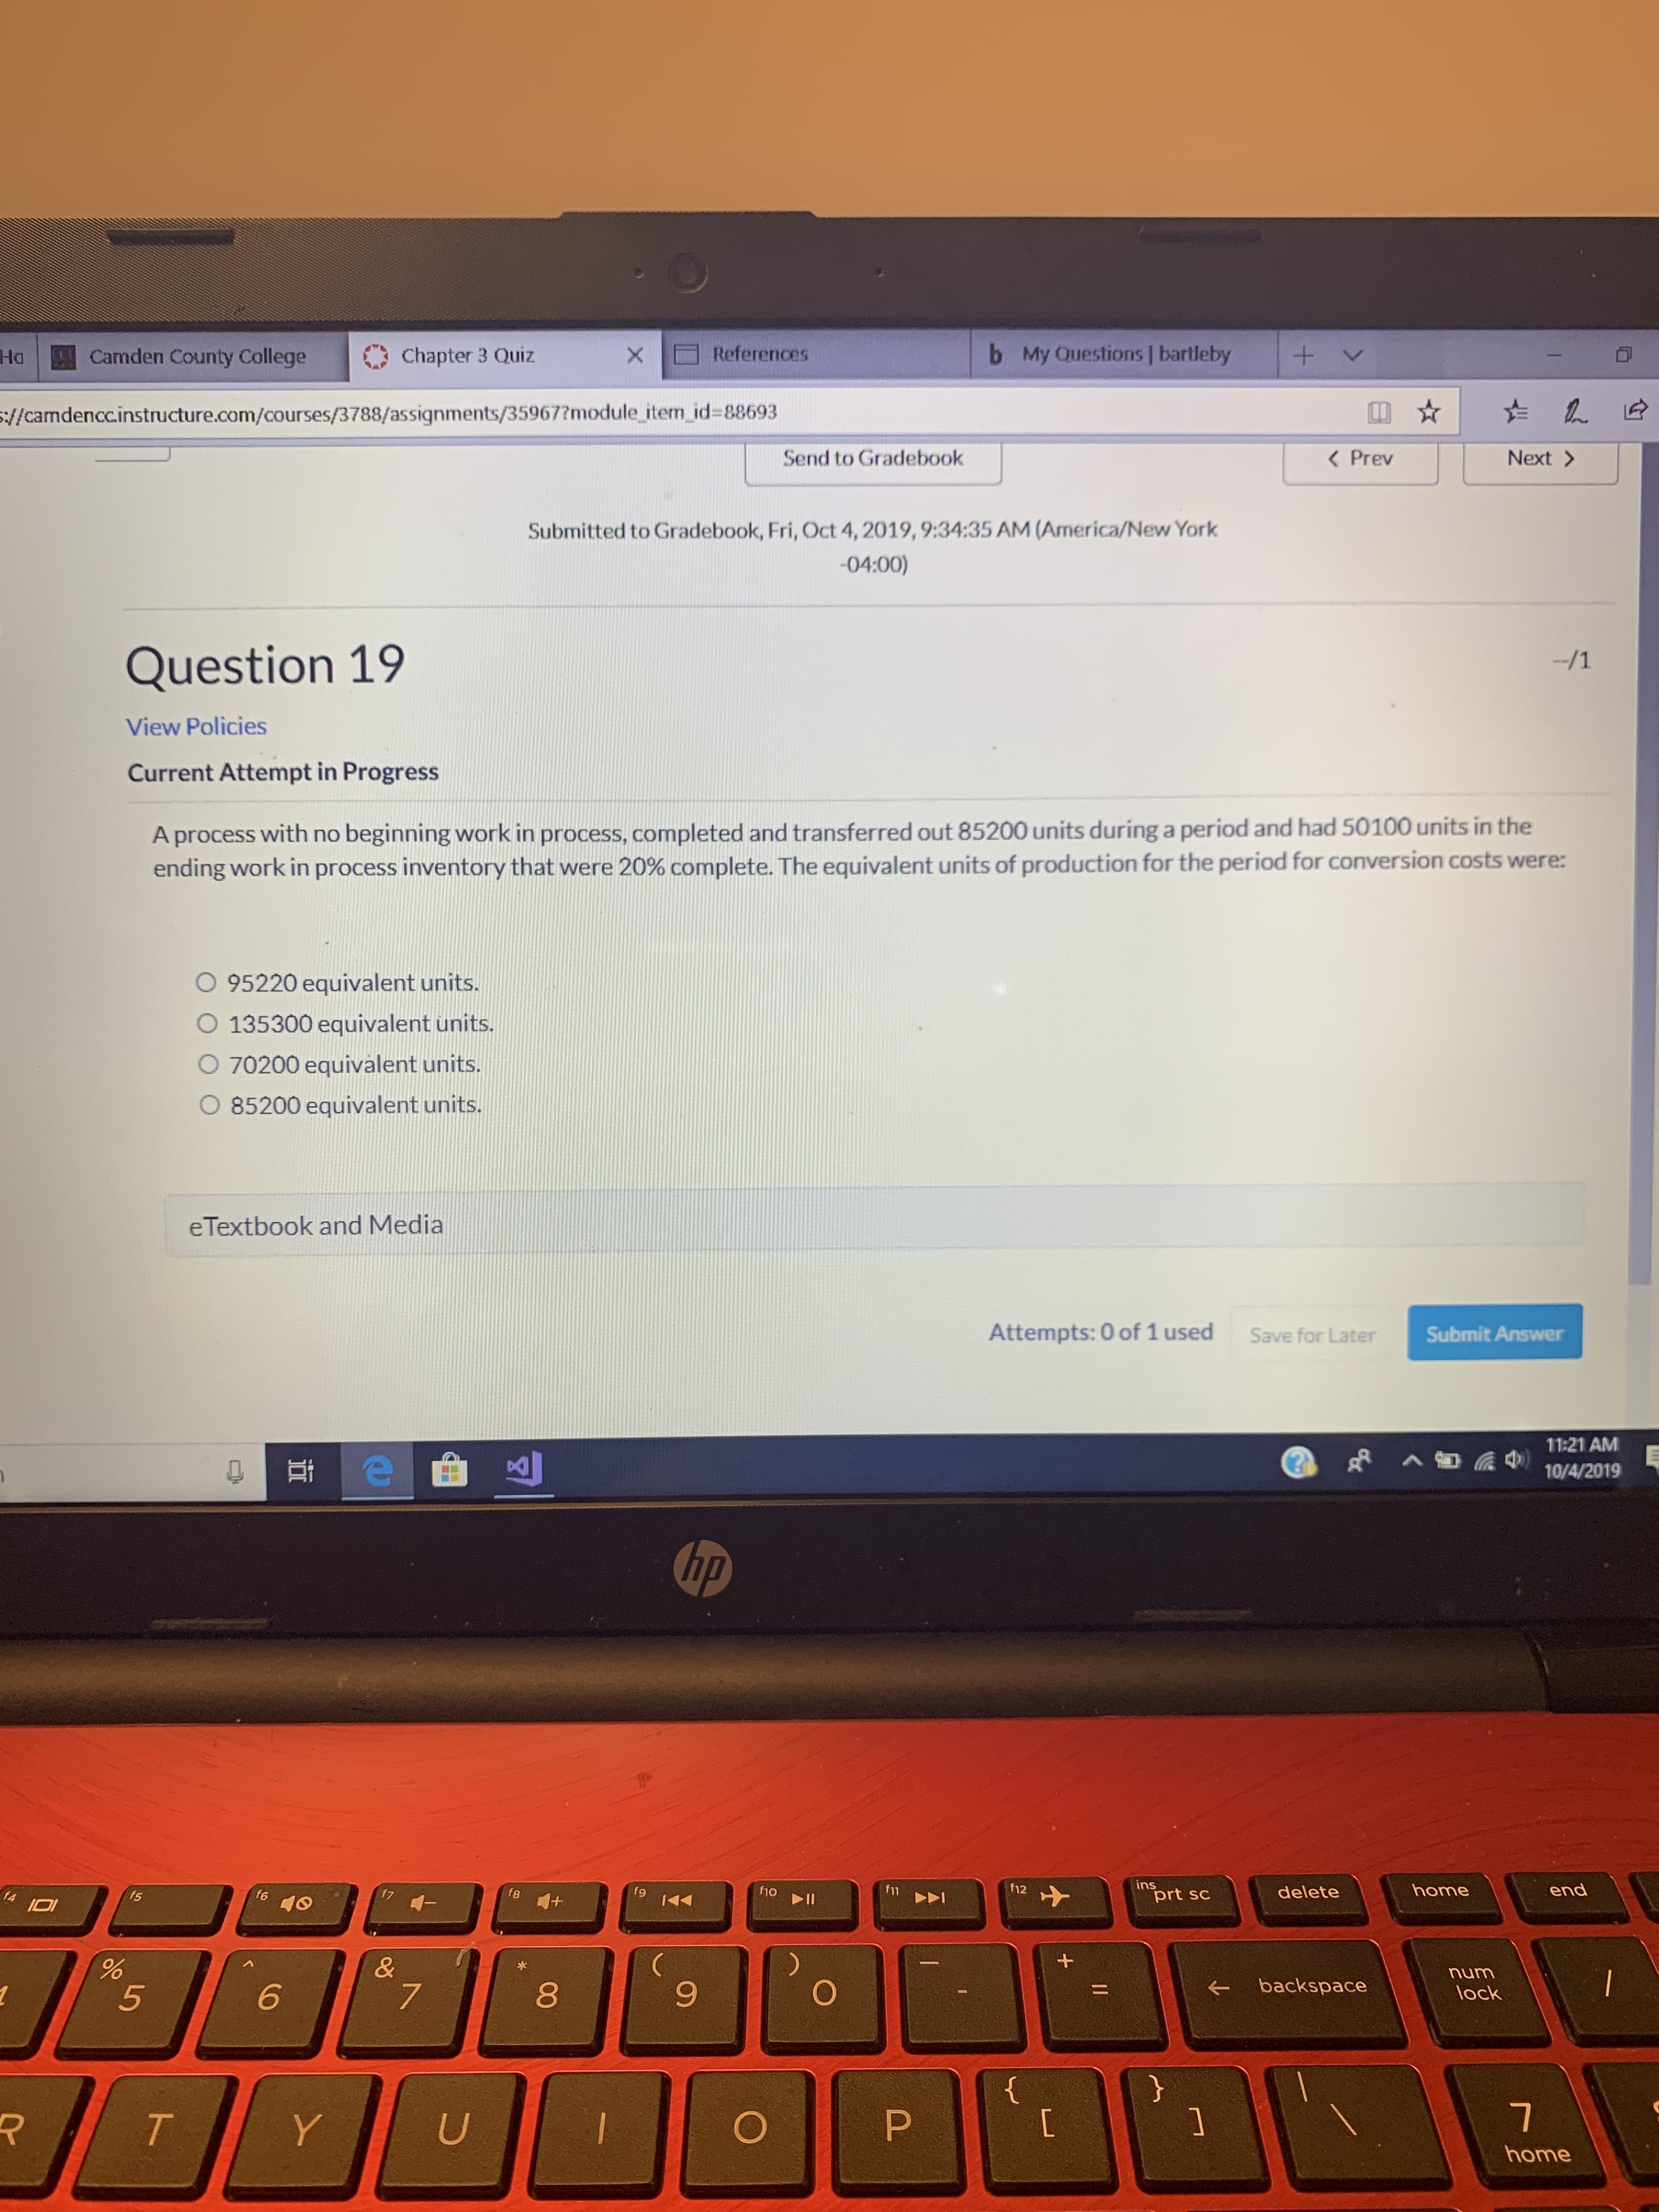 My Questions | bartleby
b
+
Camden County College
References
Chapter 3 Quiz
Ha
X
//camdenccinstructure.com/courses/3788/assignments/35967?module item id=88693
Next>
Send to Gradebook
< Prev
Submitted to Gradebook, Fri, Oct 4, 2019, 9:34:35 AM (America/New York
-04:00)
Question 19
-/1
View Policies
Current Attempt in Progress
A process with no beginning work in process, completed and transferred out 85200 units during a period and had 50100 units in the
ending work in process inventory that were 20% complete. The equivalent units of production for the period for conversion costs were:
O 95220 equivalent units.
O 135300 equivalent units.
O 70200 equivalent units.
O 85200 equivalent units.
eTextbook and Media
Attempts: 0 of 1 used
Submit Answer
Save for Later
11:21 AM
10/4/2019
hp
ins
prt sc
12
end
11
home
f10
delete
fg
f8
f5
f4
II
&
num
backspace
6
5
lock
}
{
P
T
U
Y
home
+
96
